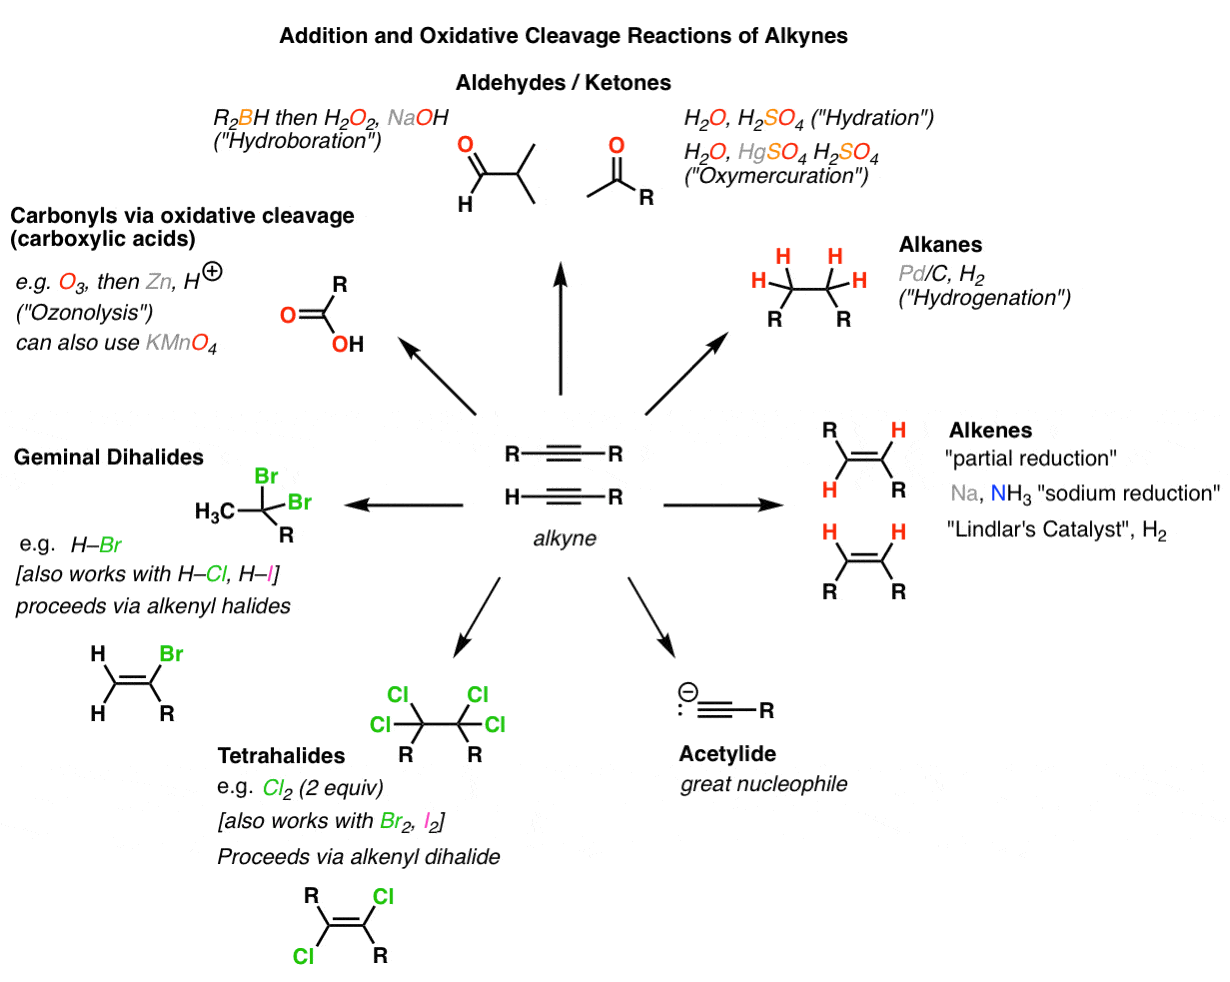 synthesis-5-reactions-of-alkynes-master-organic-chemistry